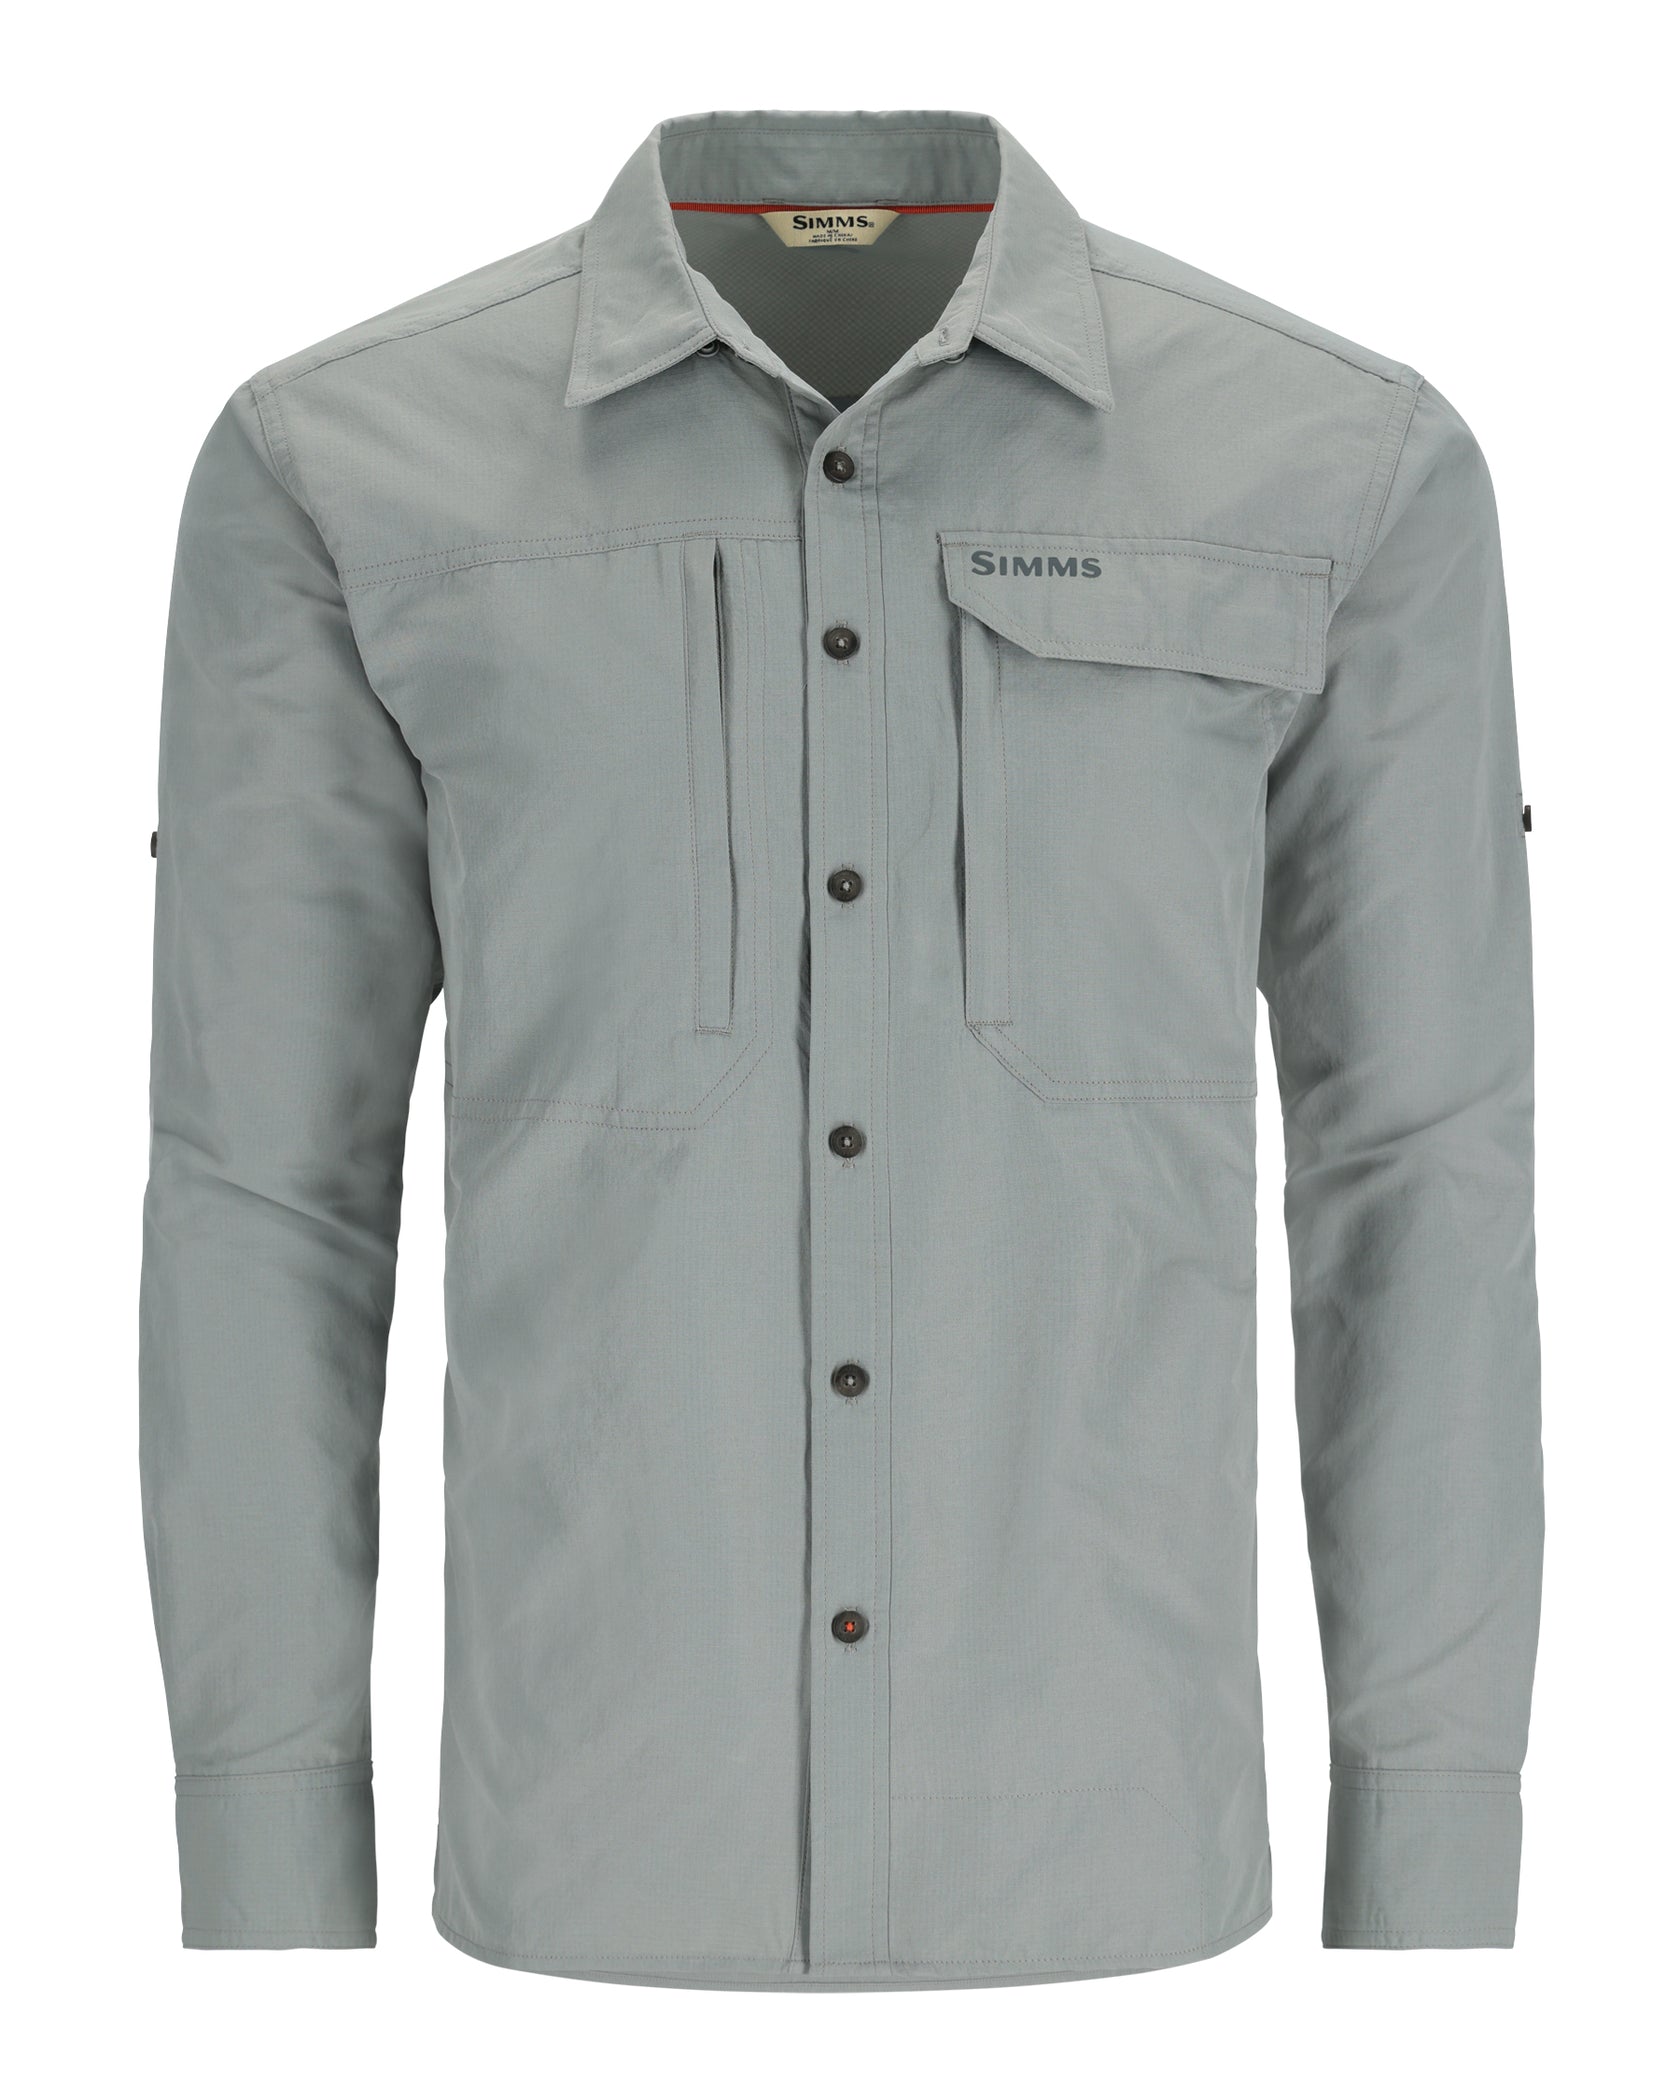 SIMMS M's Guide Shirt - Atlantic Rivers Outfitting Company